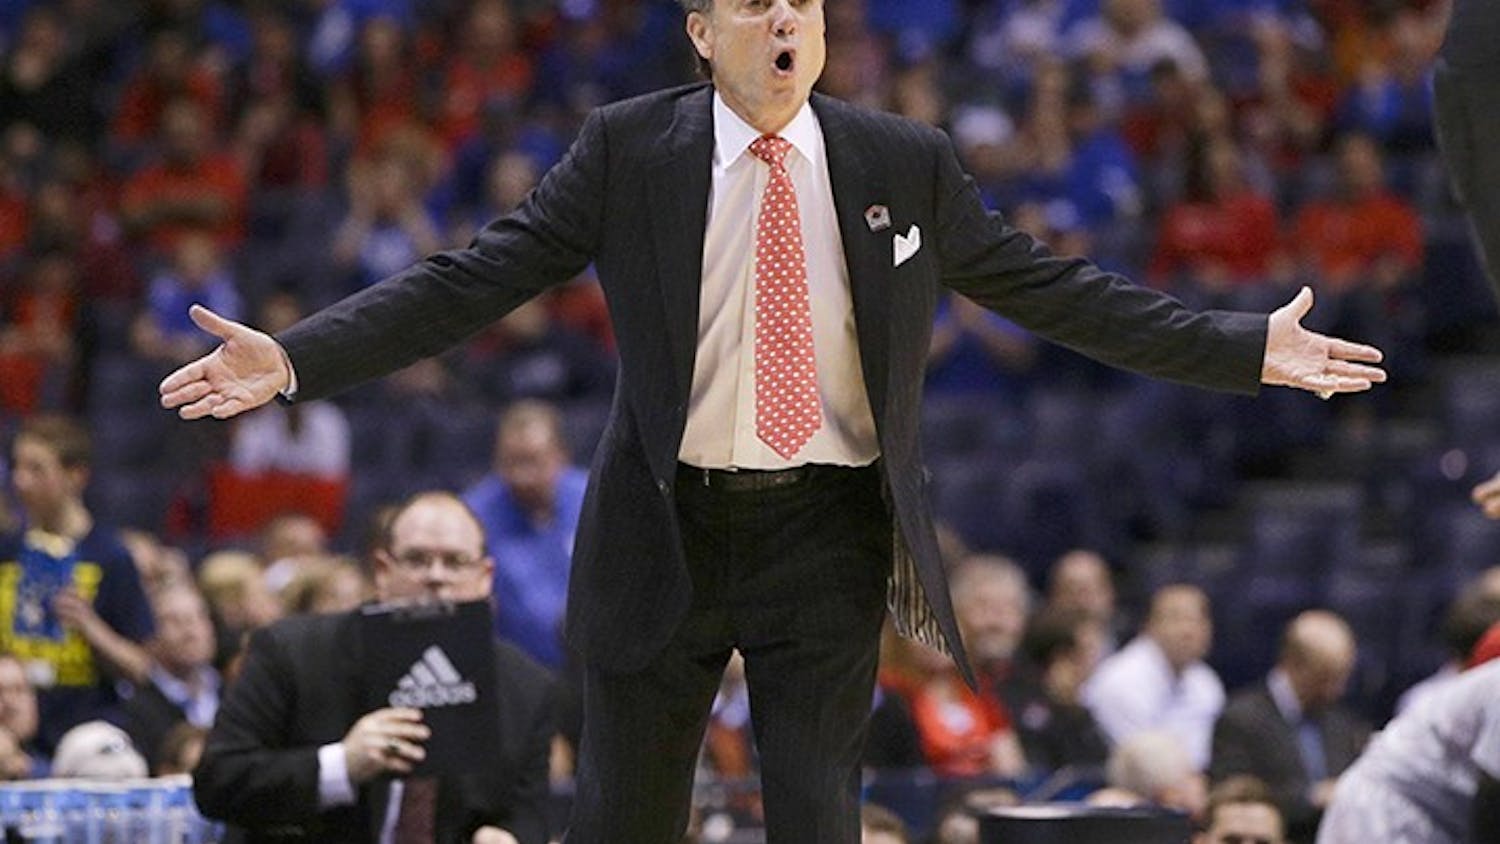 Louisville head coach Rick Pitino questions a call during action against Kentucky in the NCAA Tournament&apos;s Midwest Region semifinal at Lucas Oil Stadium in Indianapolis on Friday, March 28, 2014. (Mark Cornelison/Lexington Herald-Leader/MCT)